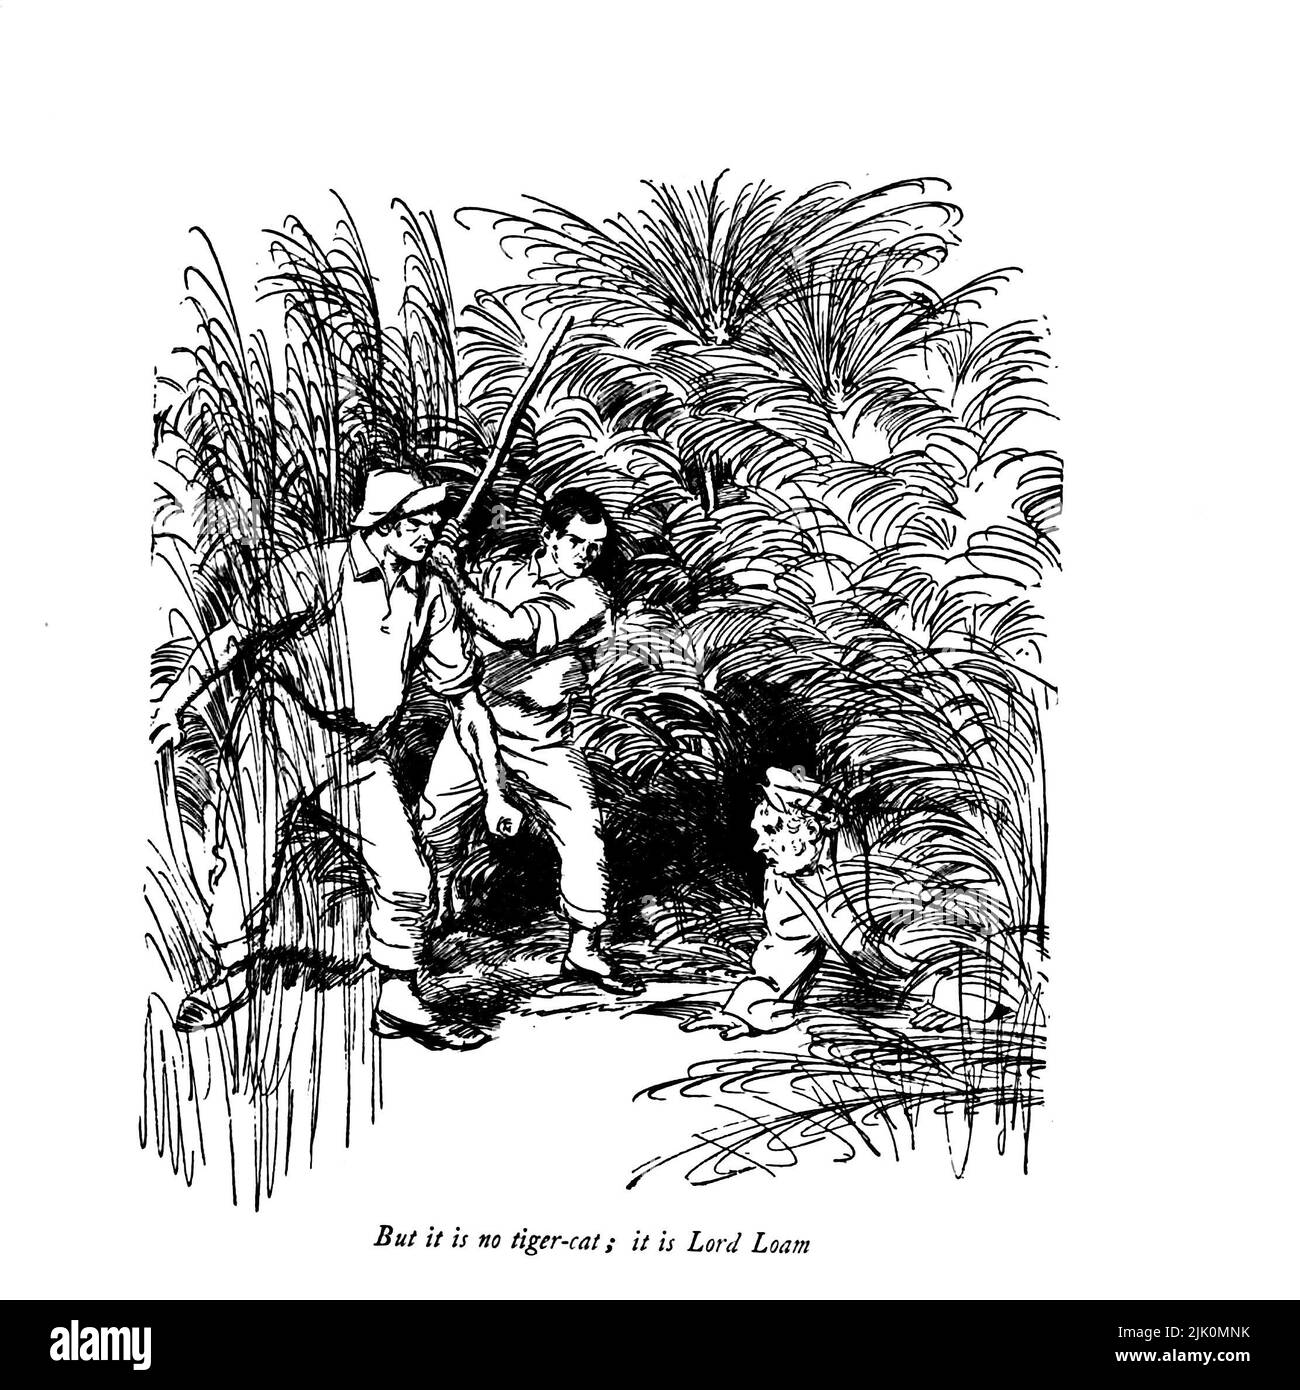 But it is no Tiger-Cat it is Lord Loam The Admirable Crichton is a comic stage play written in 1902 by J. M. Barrie. Illustrated by Hugh Thomson RI (1 June 1860 – 7 May 1920) was an Irish Illustrator born at Coleraine near Derry. He is best known for his pen-and-ink illustrations of works by authors such as Jane Austen, Charles Dickens, and J. M. Barrie. Published 1914 London, Hodder & Stoughton Stock Photo